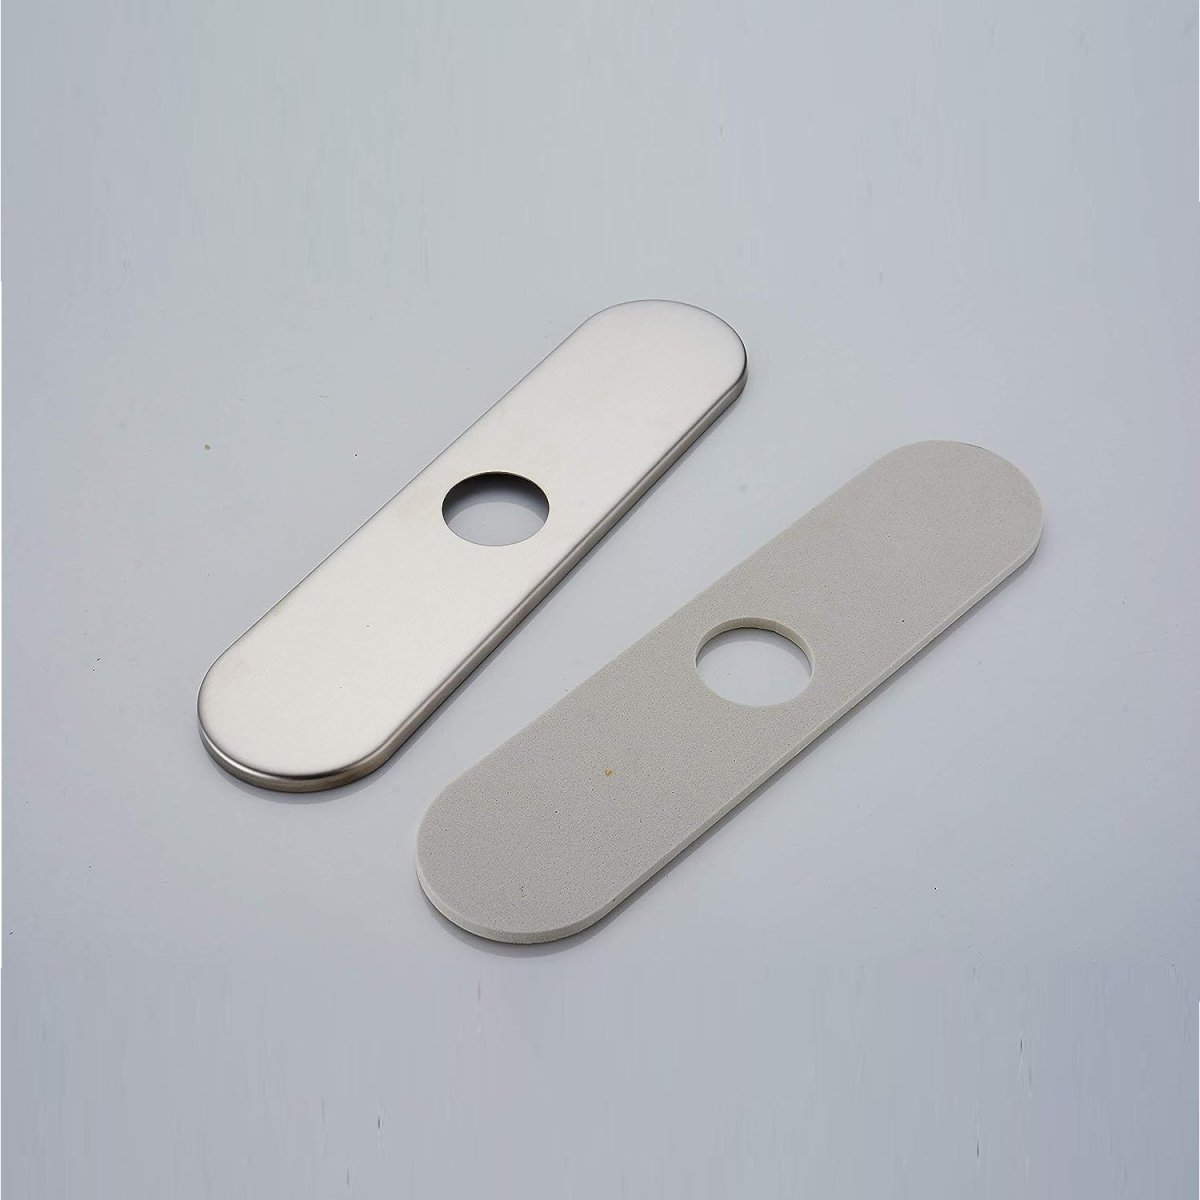 10 Inch Faucet Hole Cover Deck Plate Brushed Nickel - buyfaucet.com